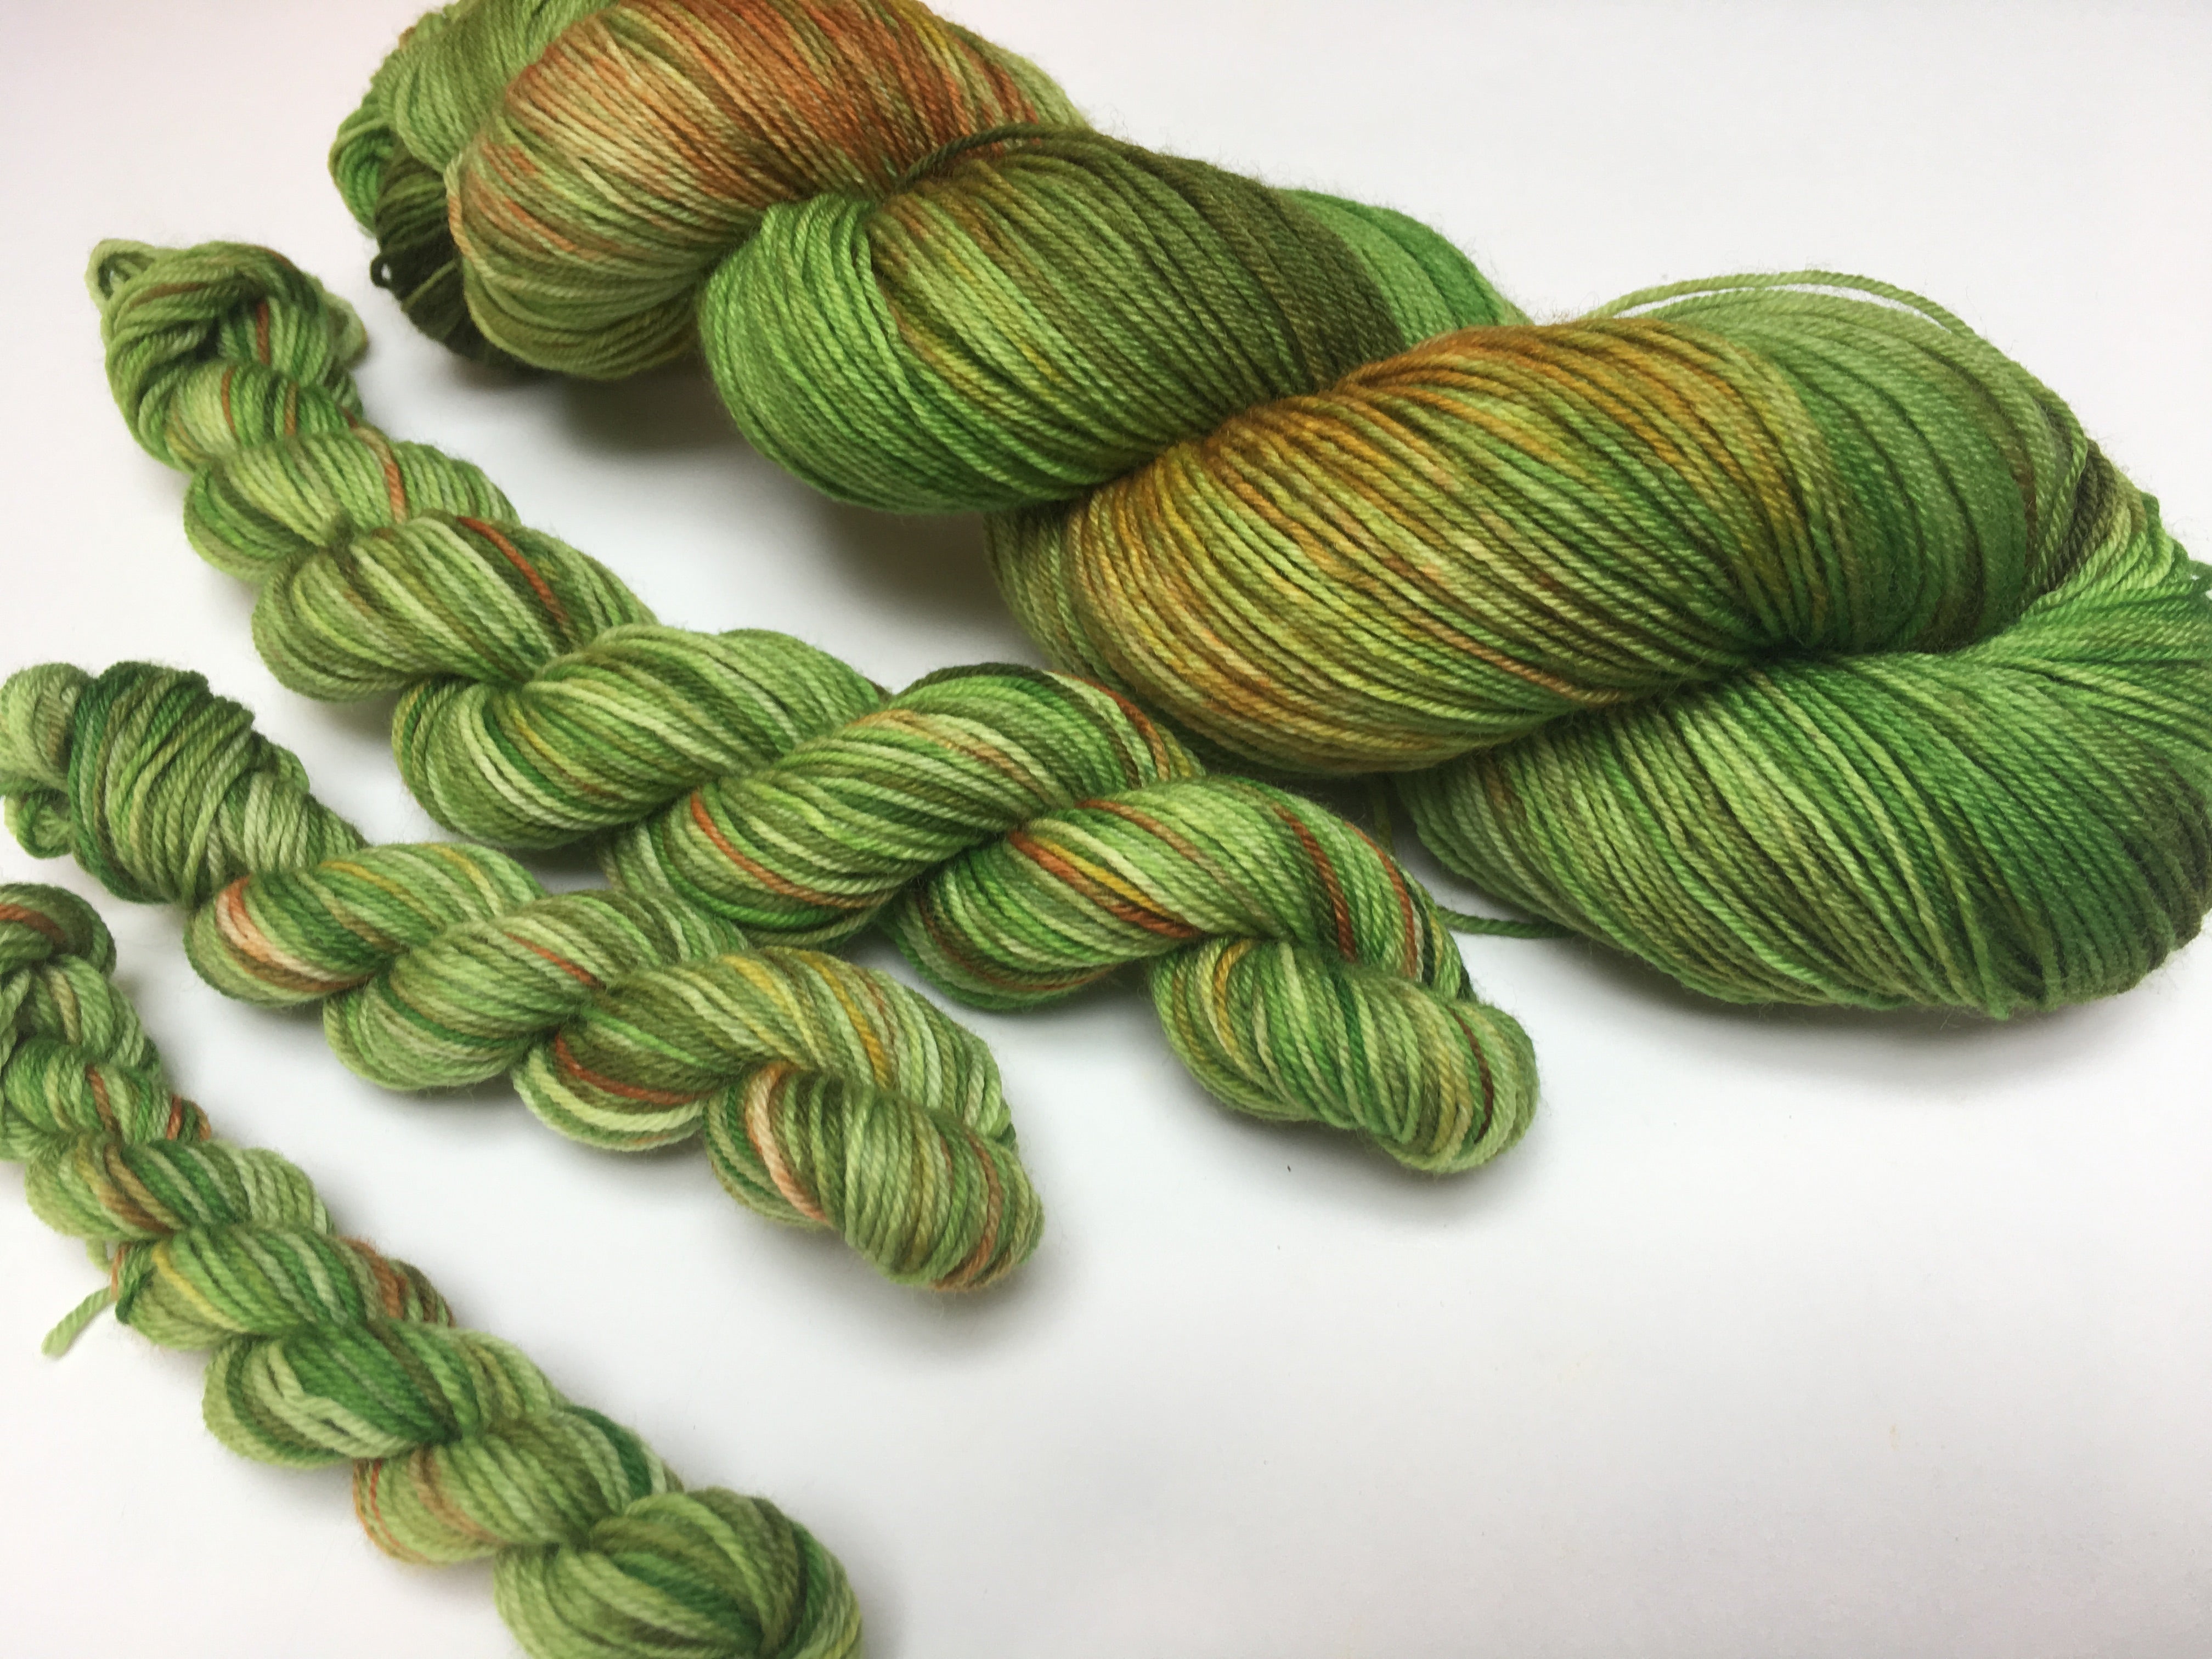 green hand dyed merino yarn skeins for knitting and crochet projects